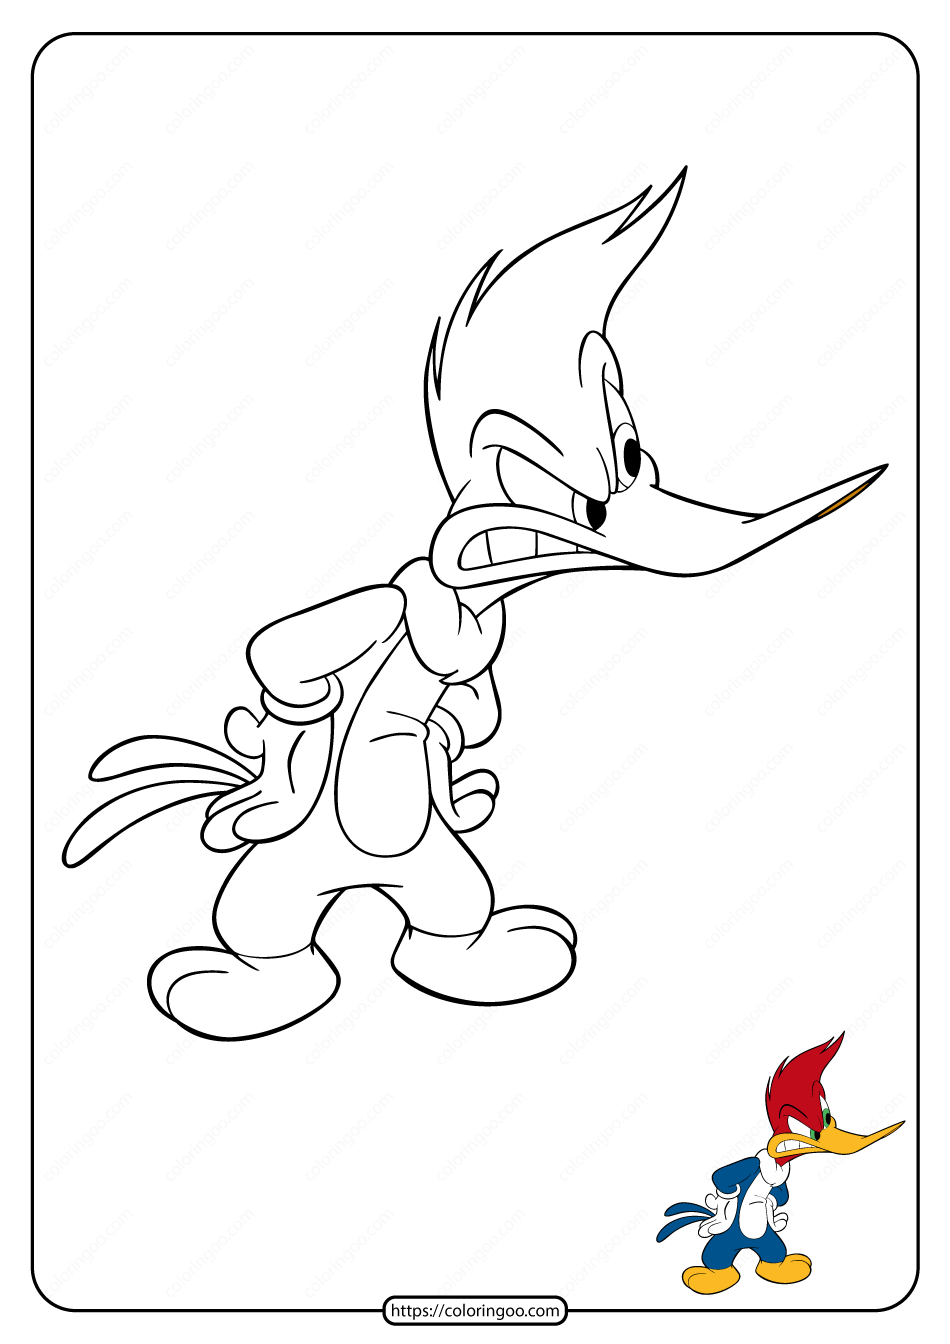 Angry Woody Woodpecker Coloring Page